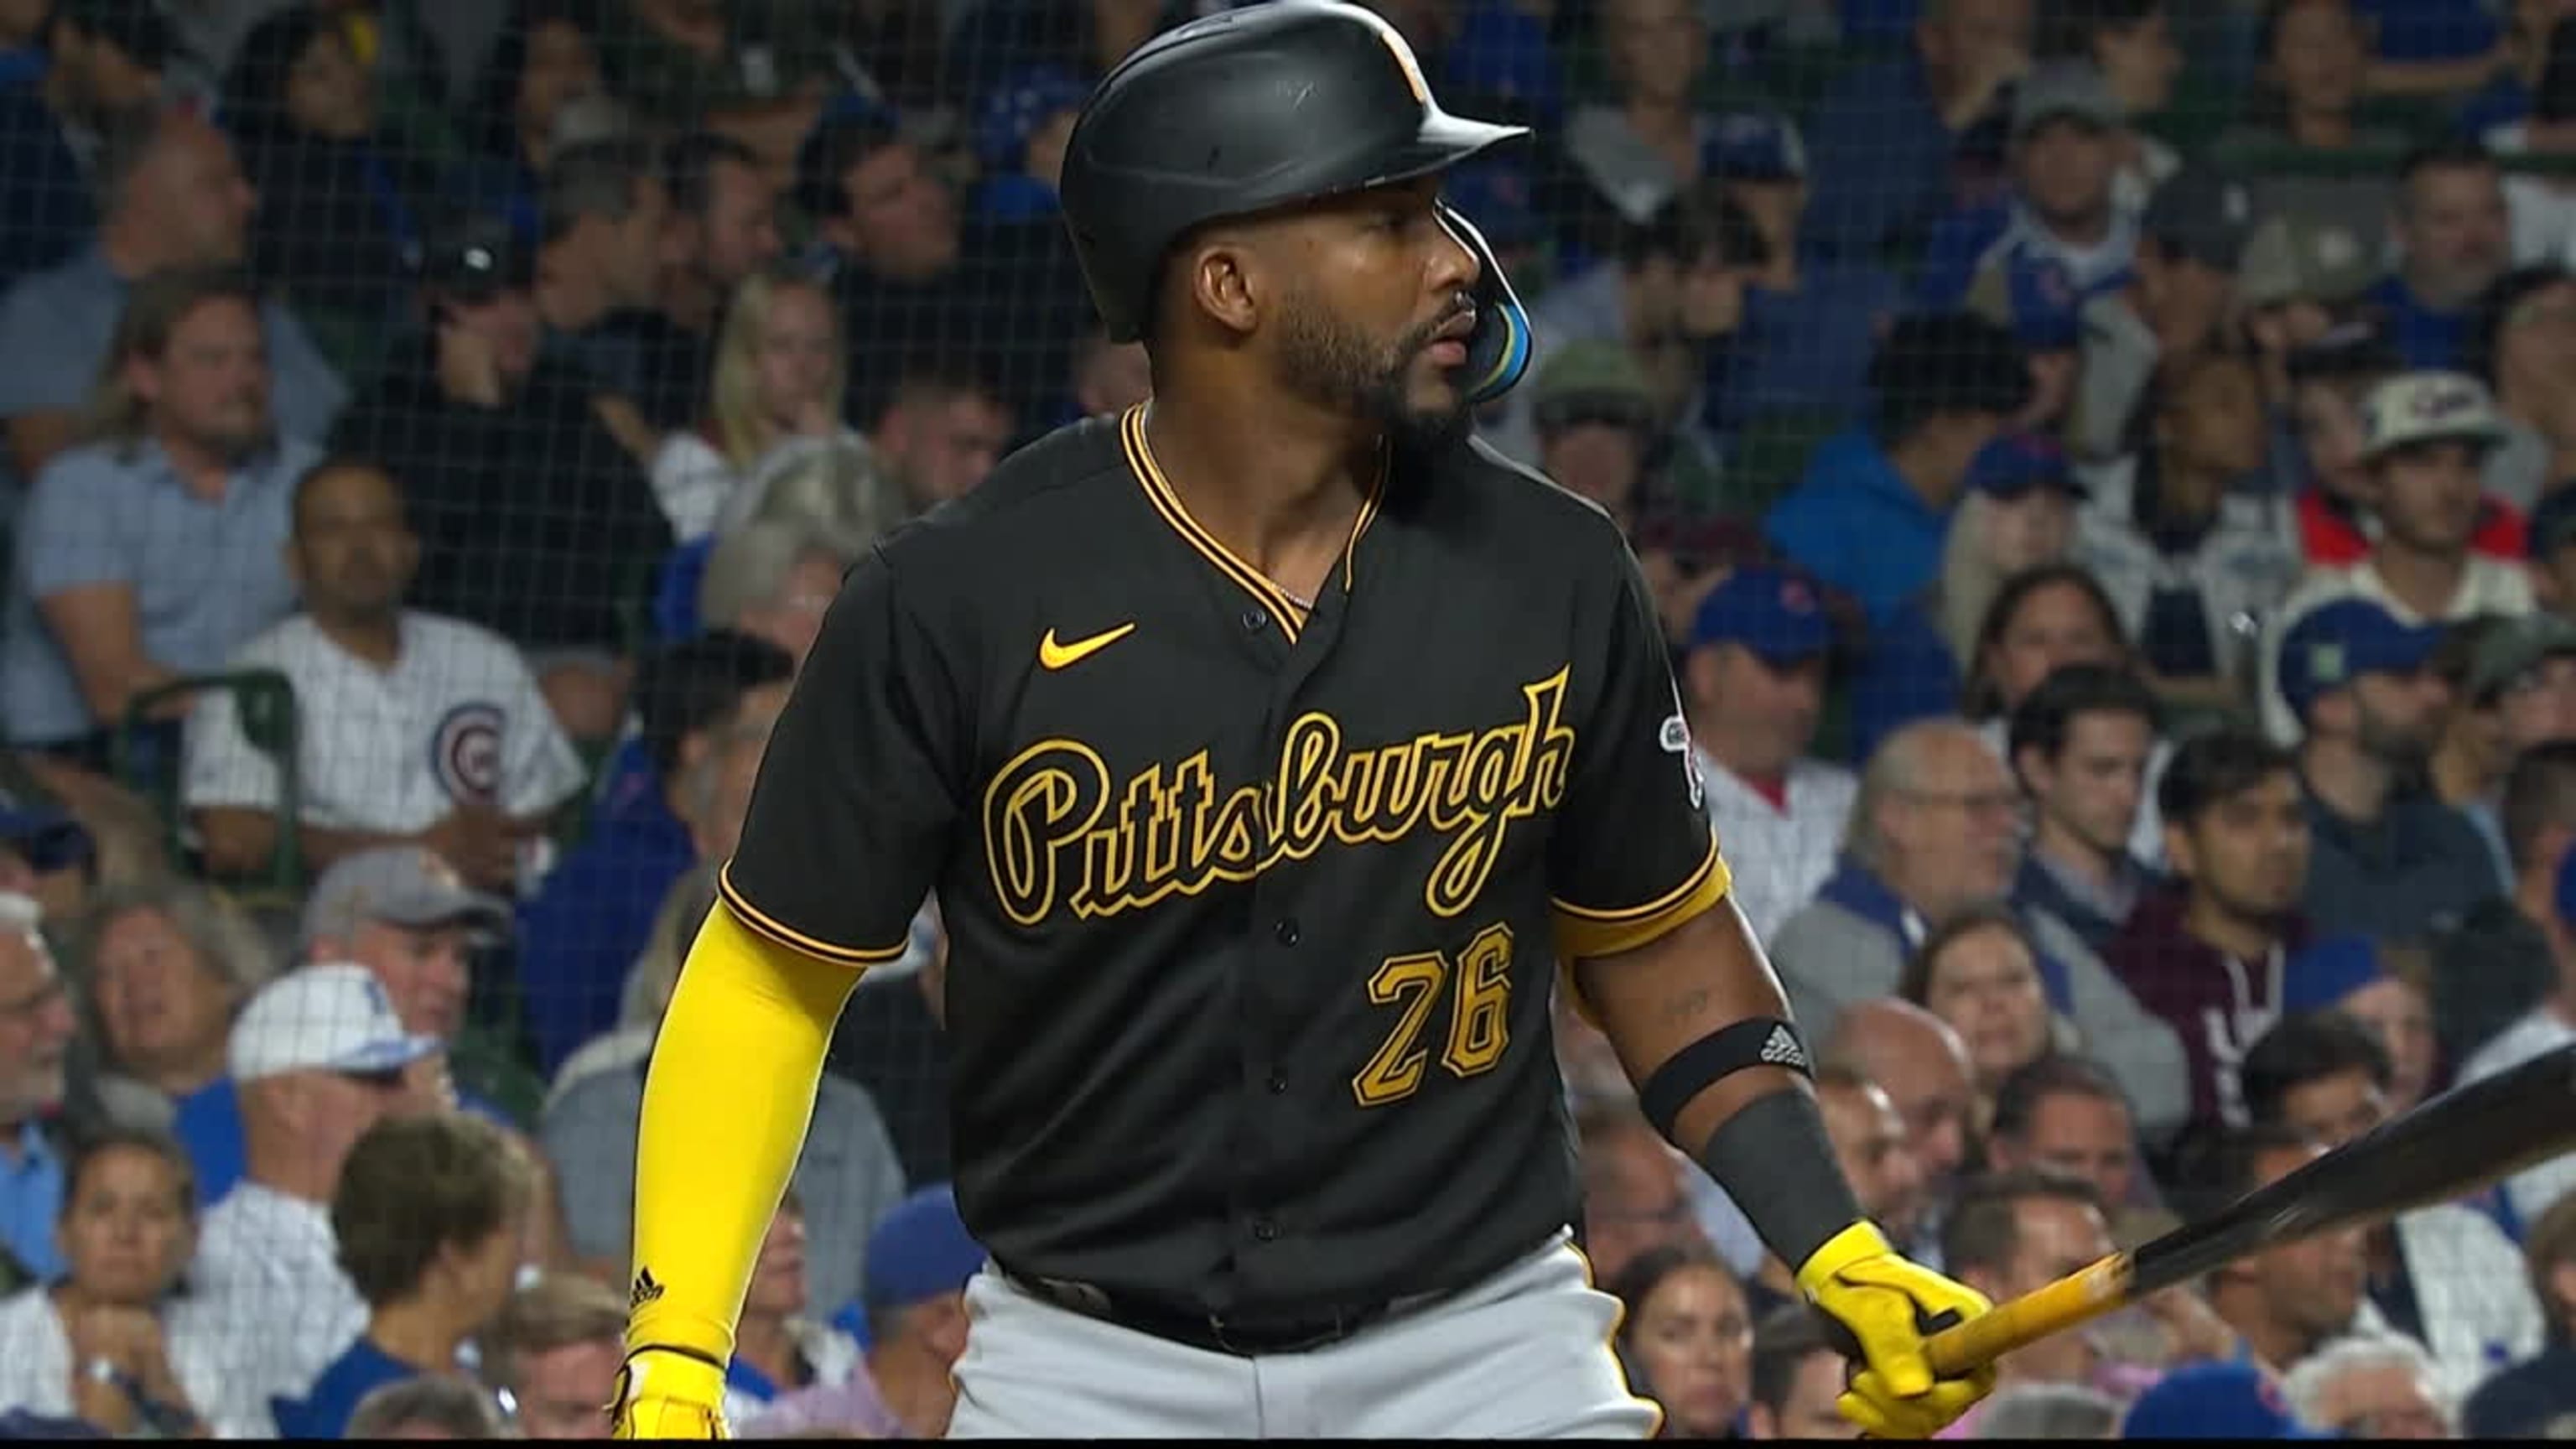 Josh Palacios' pinch hit home run in 9th lifts Pirates over